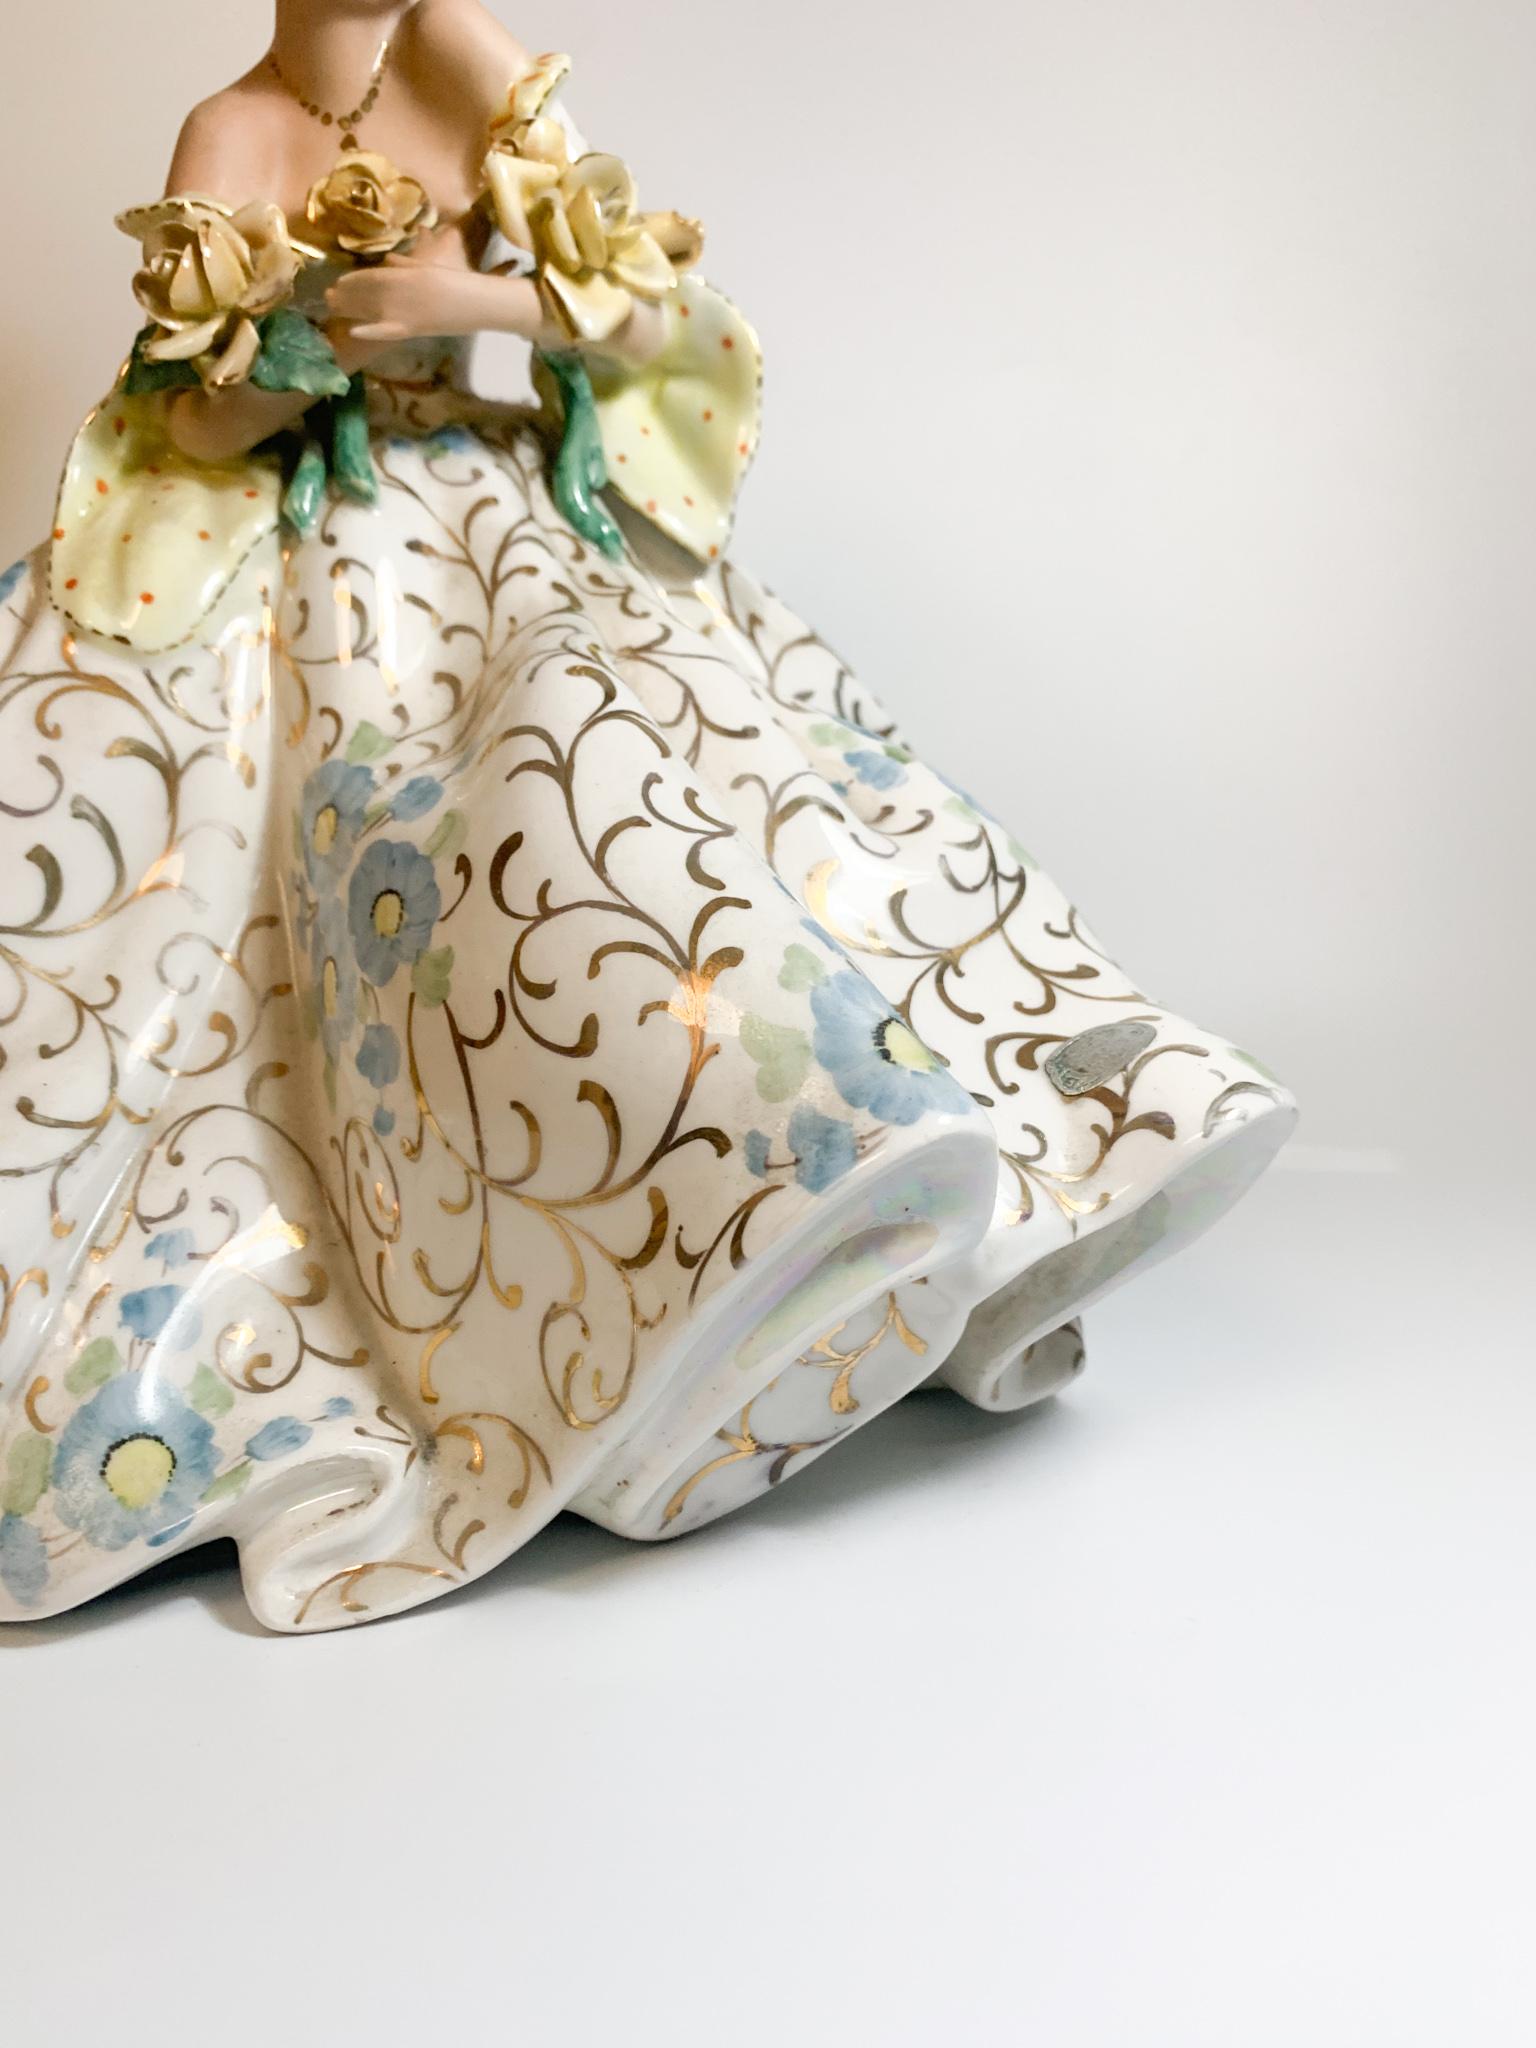 Italian Ceramic Statue of a Lady with Iridescent Details by Tiziano Galli from the 1950s